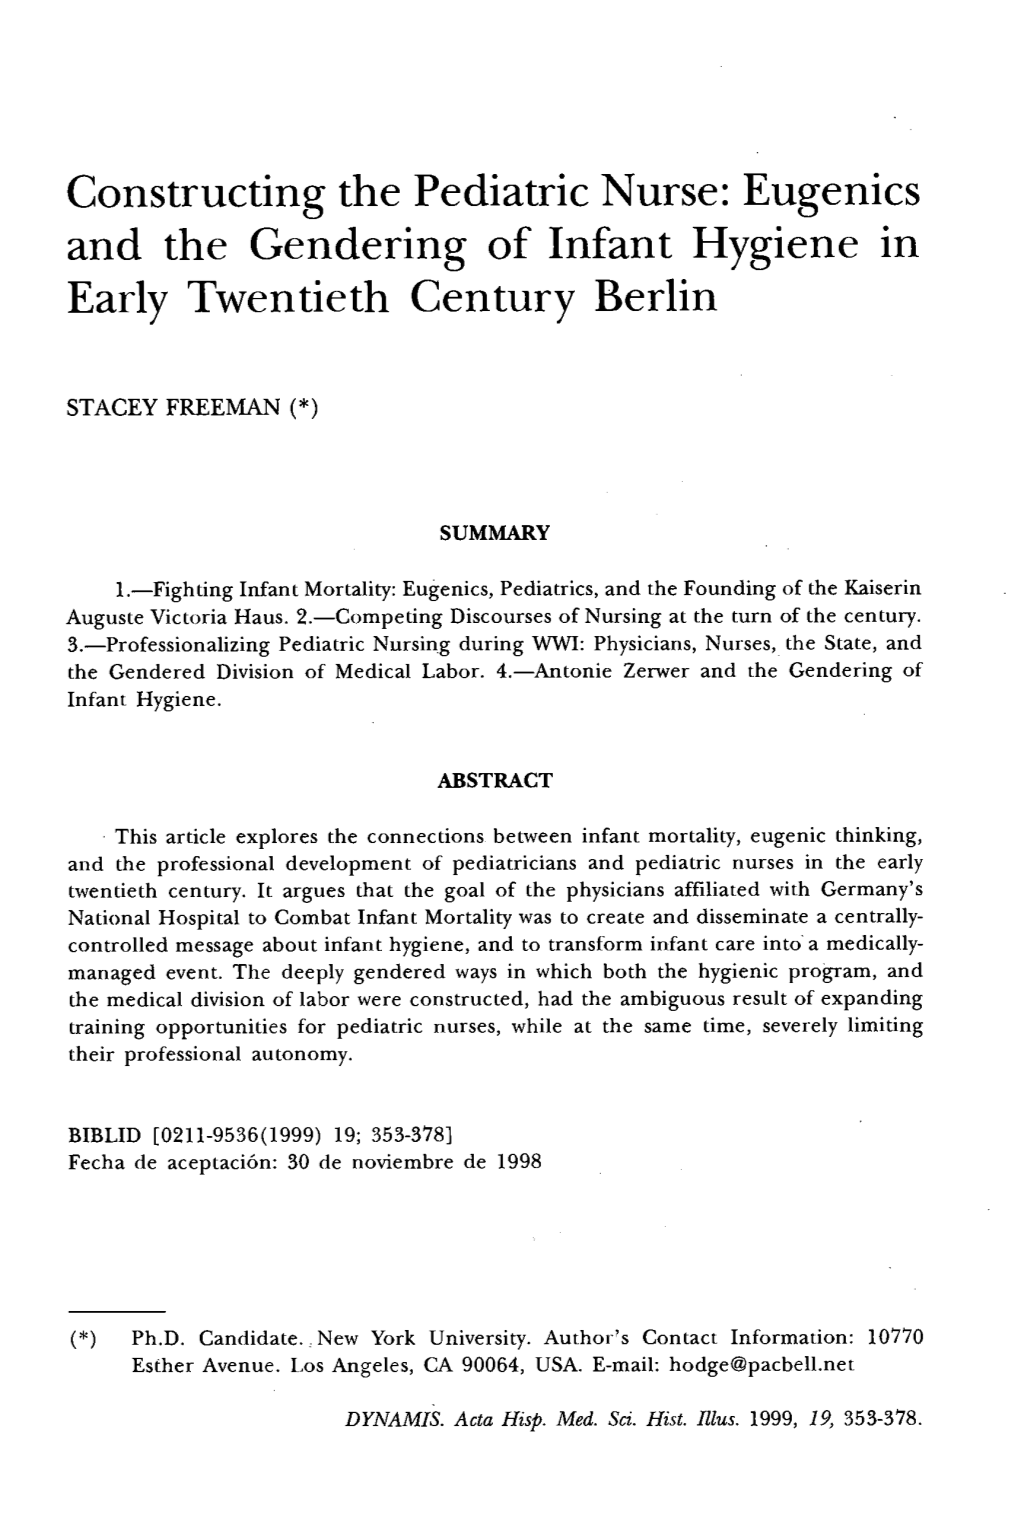 Eugenics and the Gendering of Infant Hygiene in Early Twentieth Century Berlin